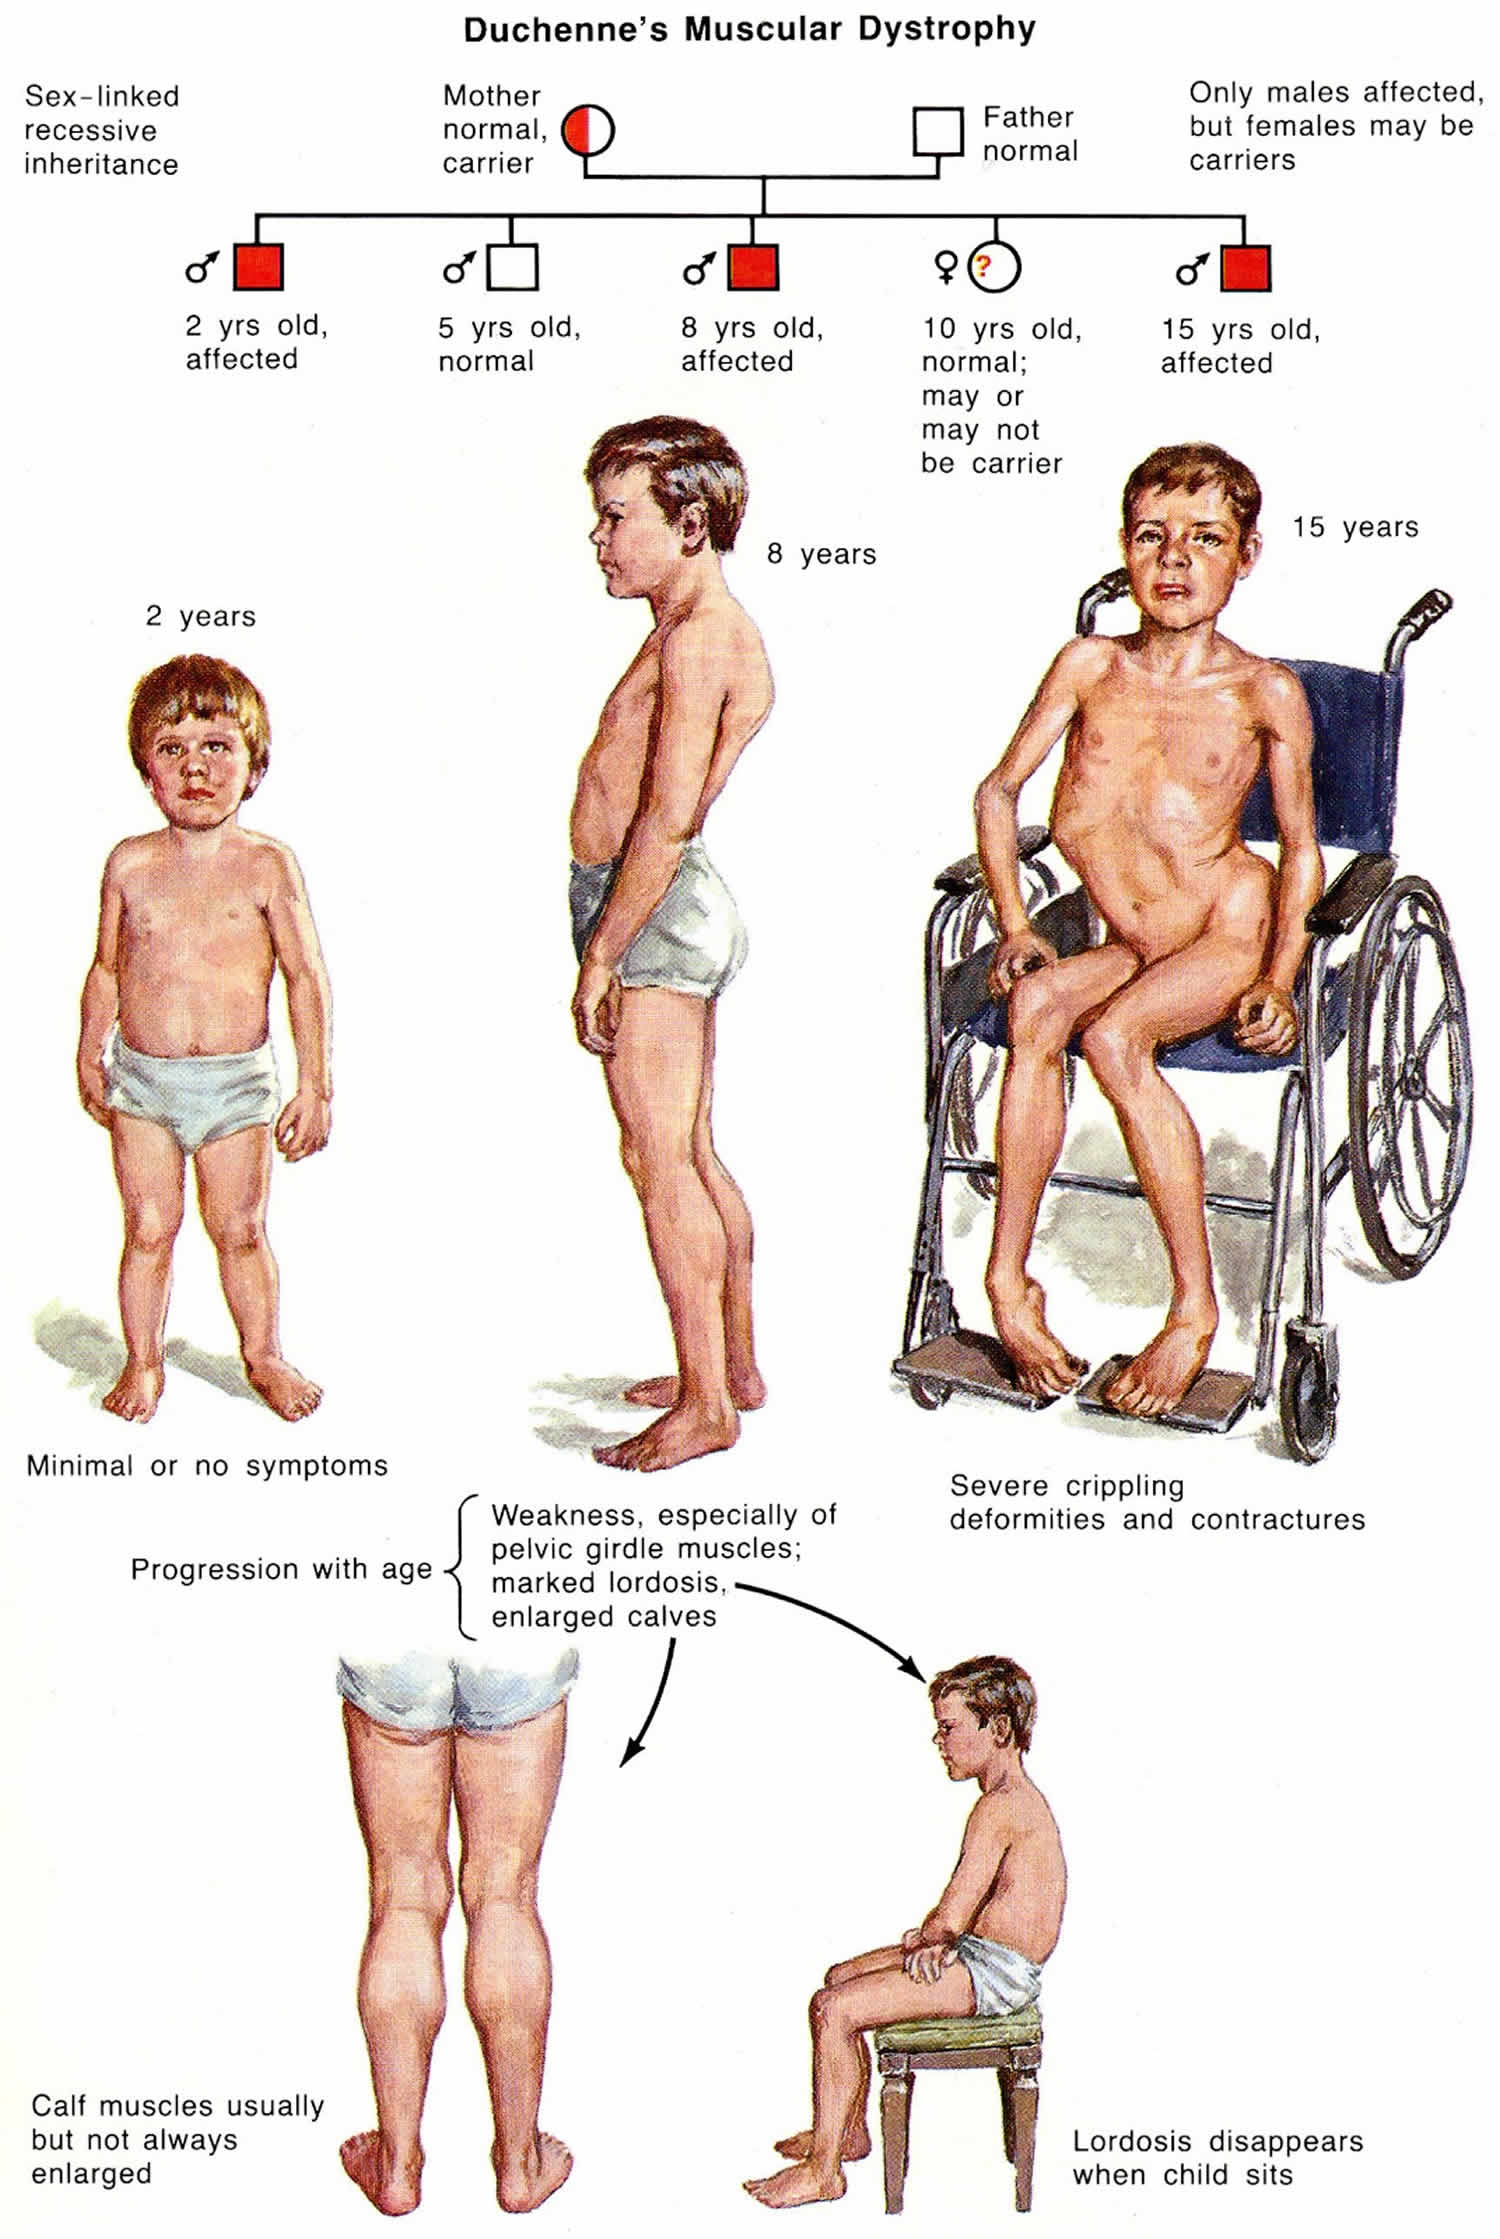 research paper on duchenne muscular dystrophy